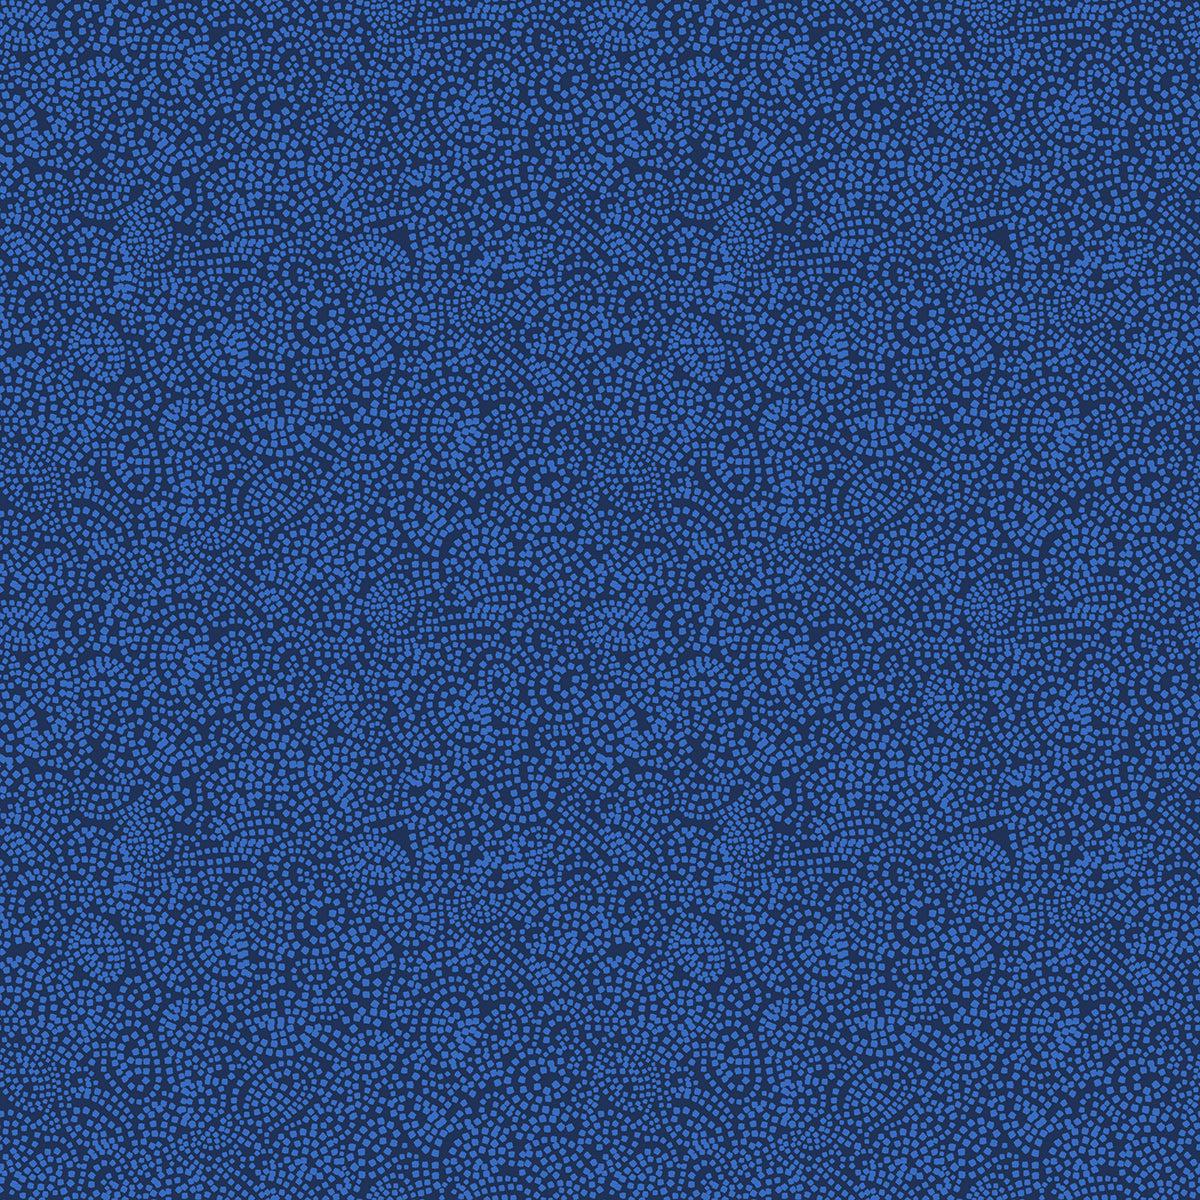 Ruby Star Society-Pebble Navy-fabric-gather here online